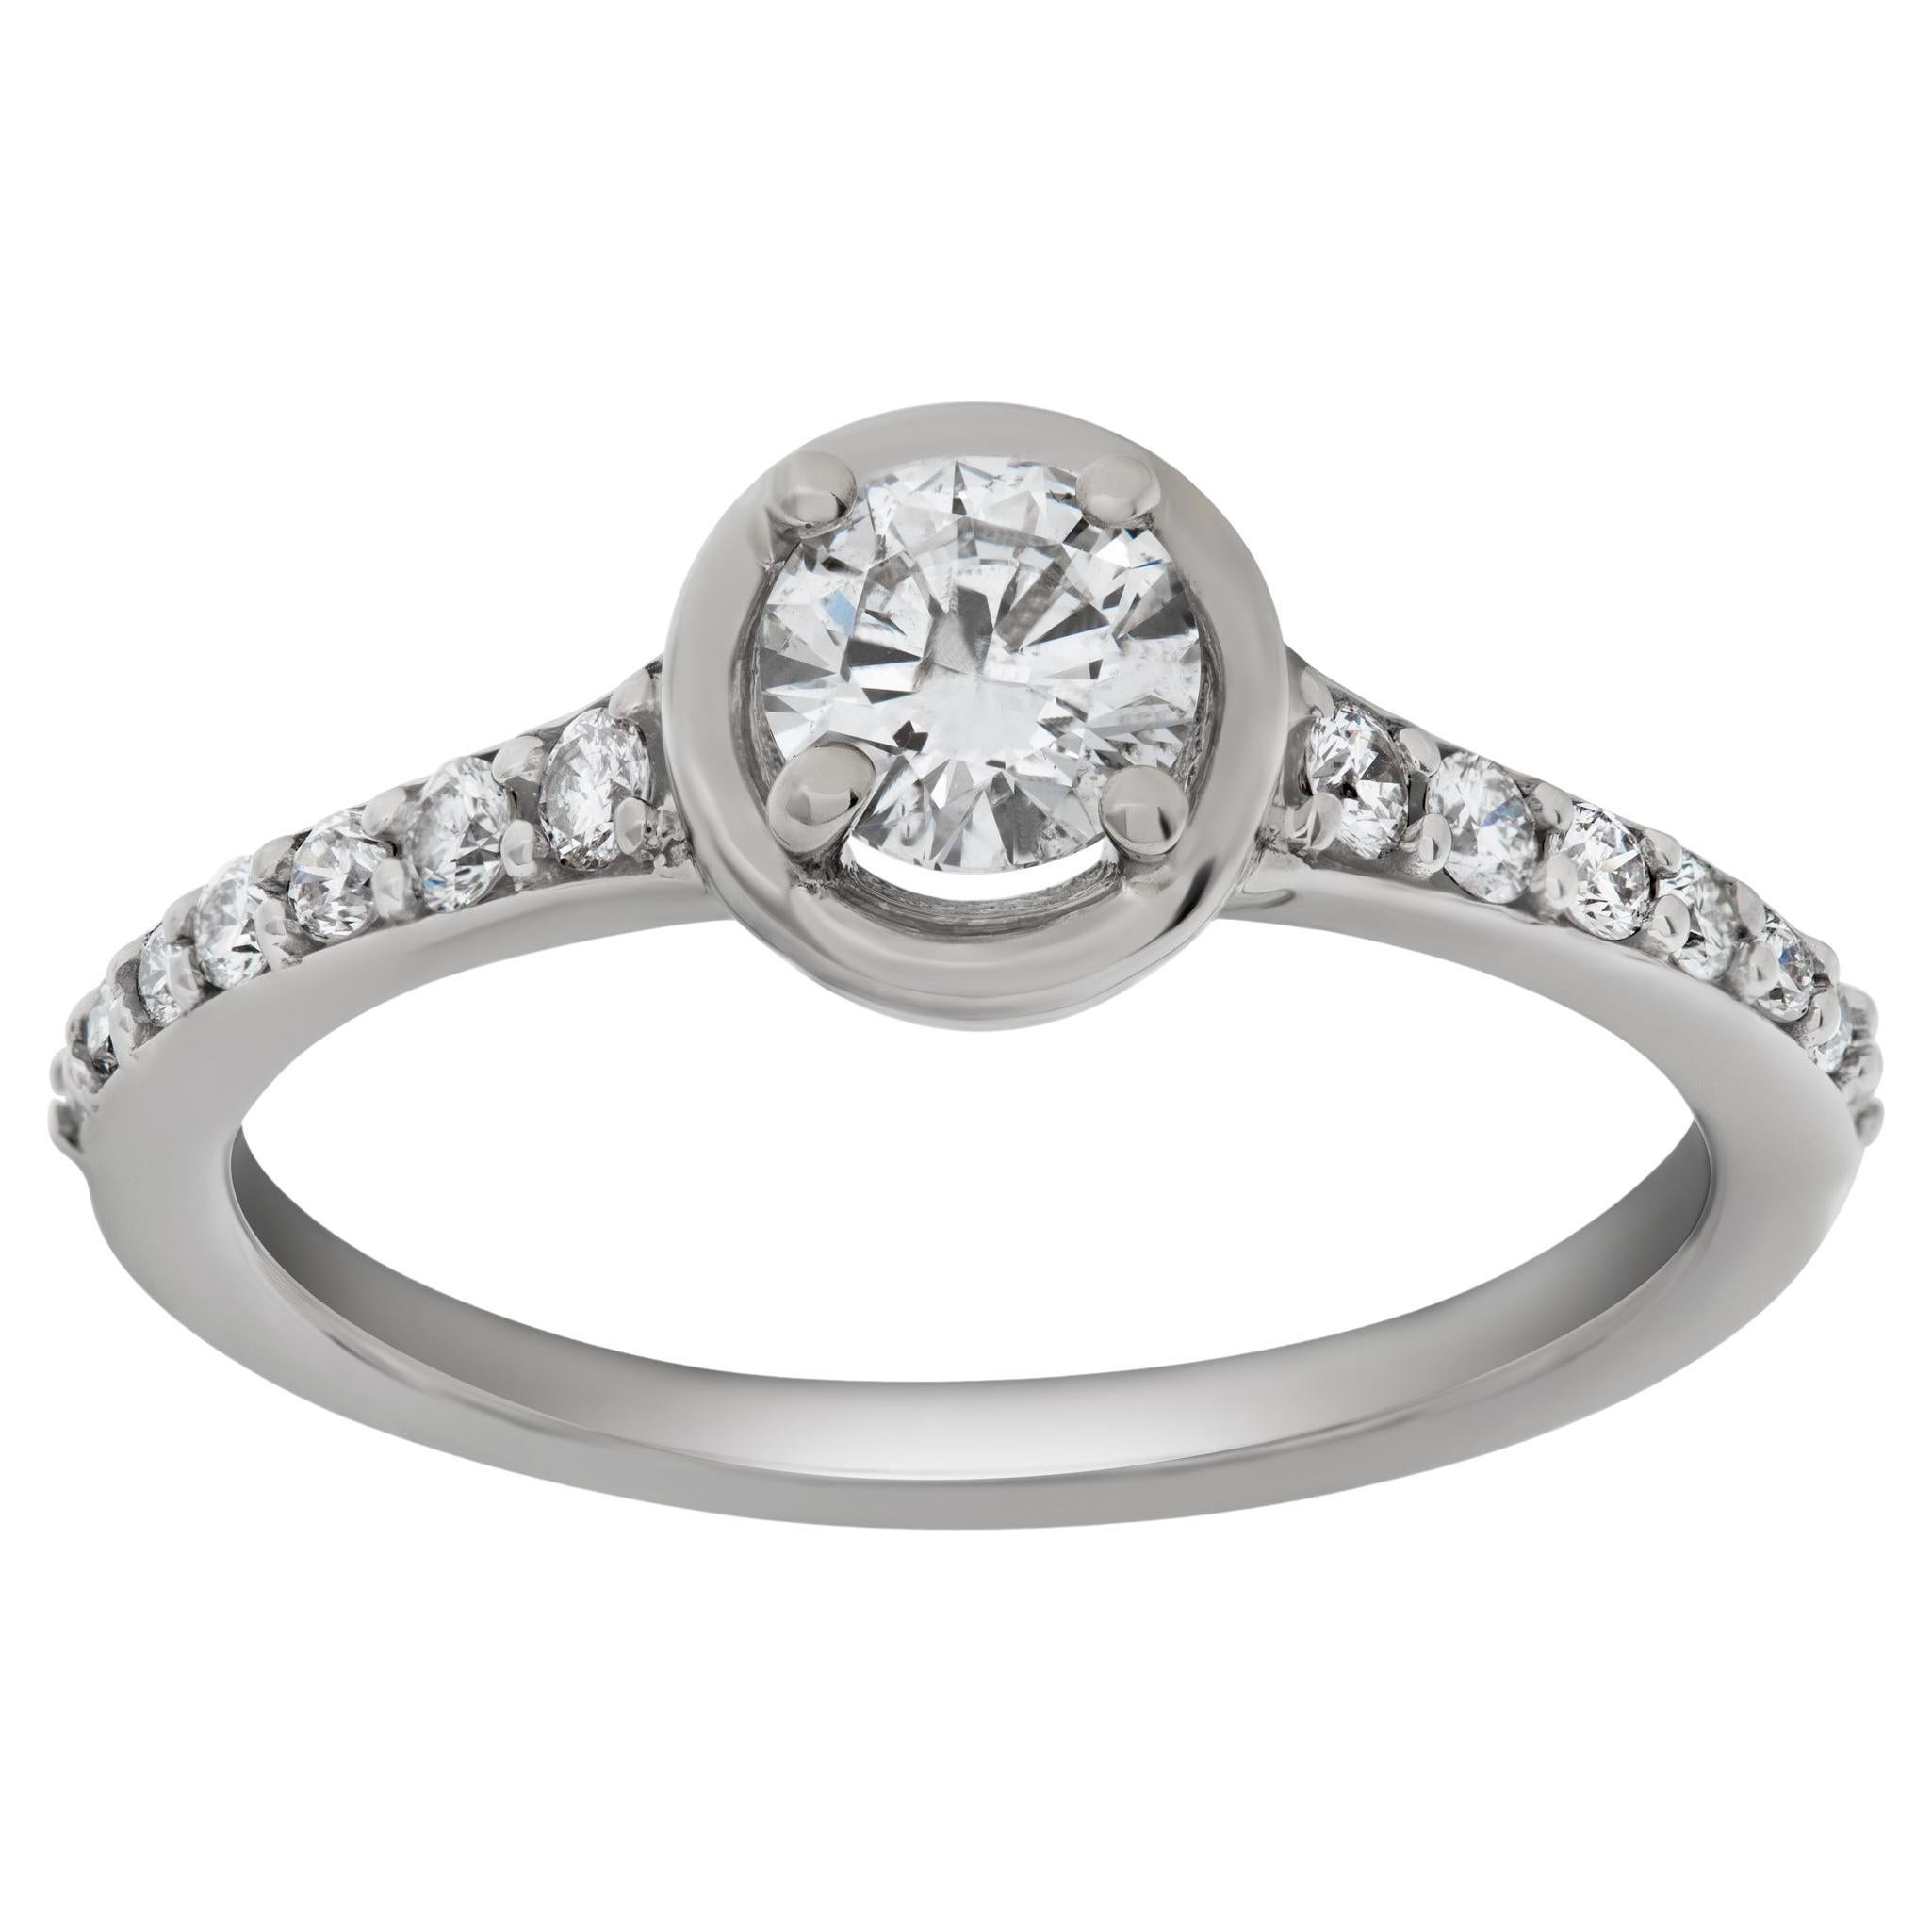 Diamond ring in 14k white gold. 0.75 carats in diamonds. Size 7.25 For Sale